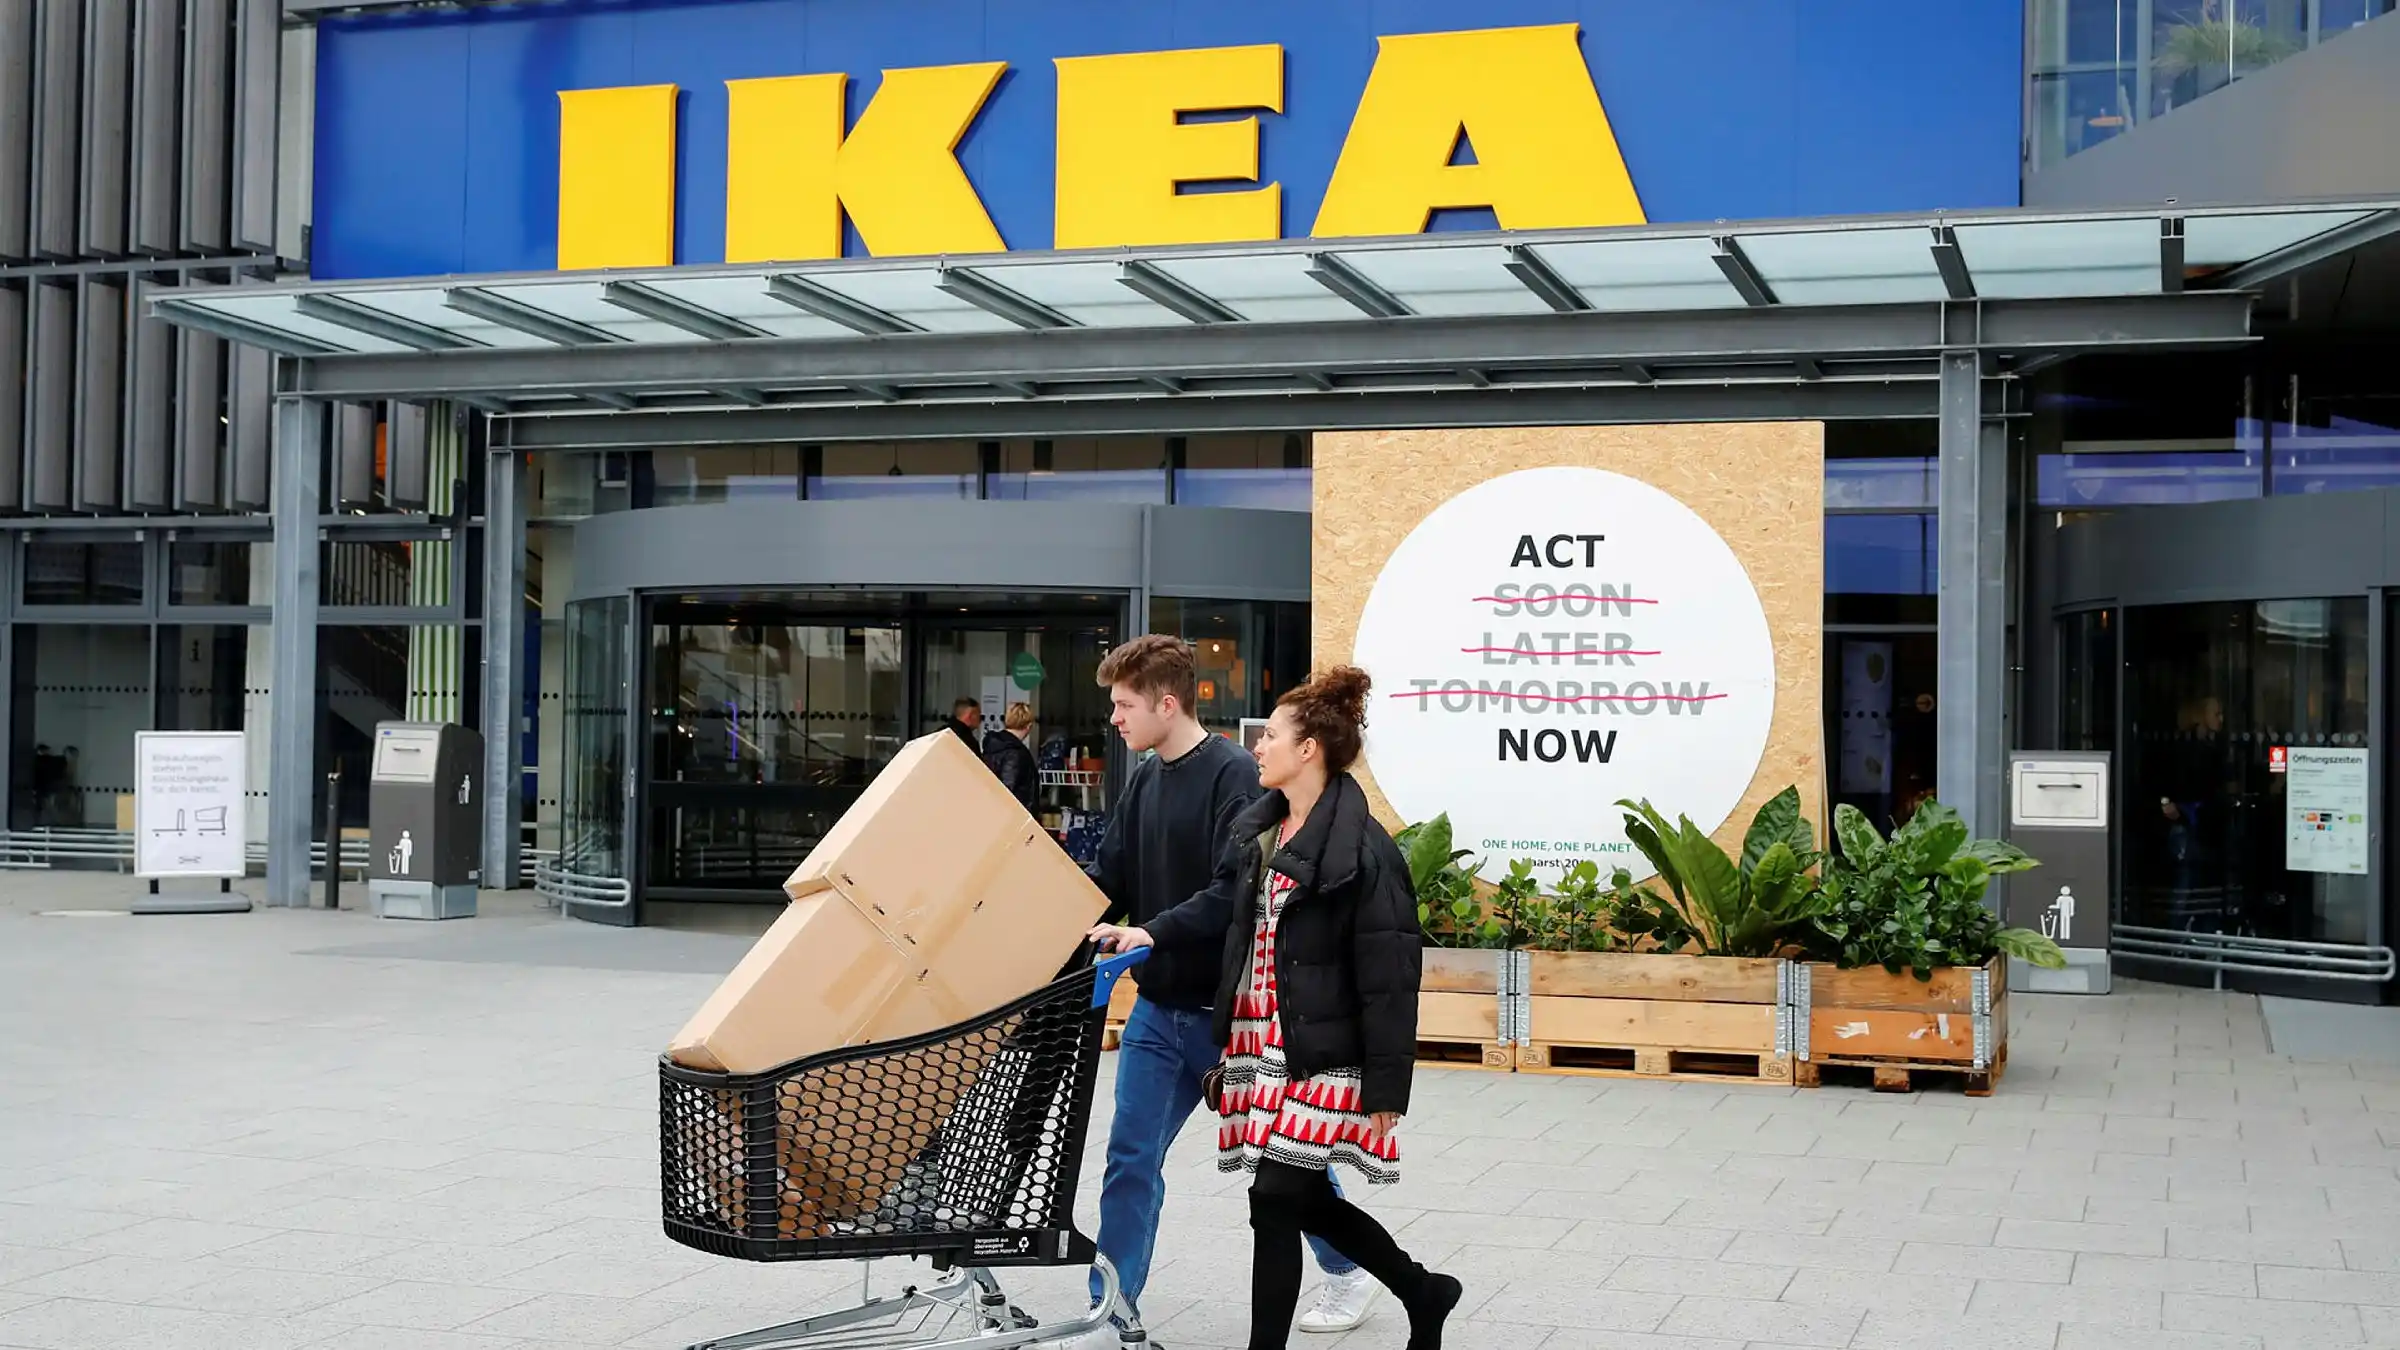 More sustainable, every day - IKEA